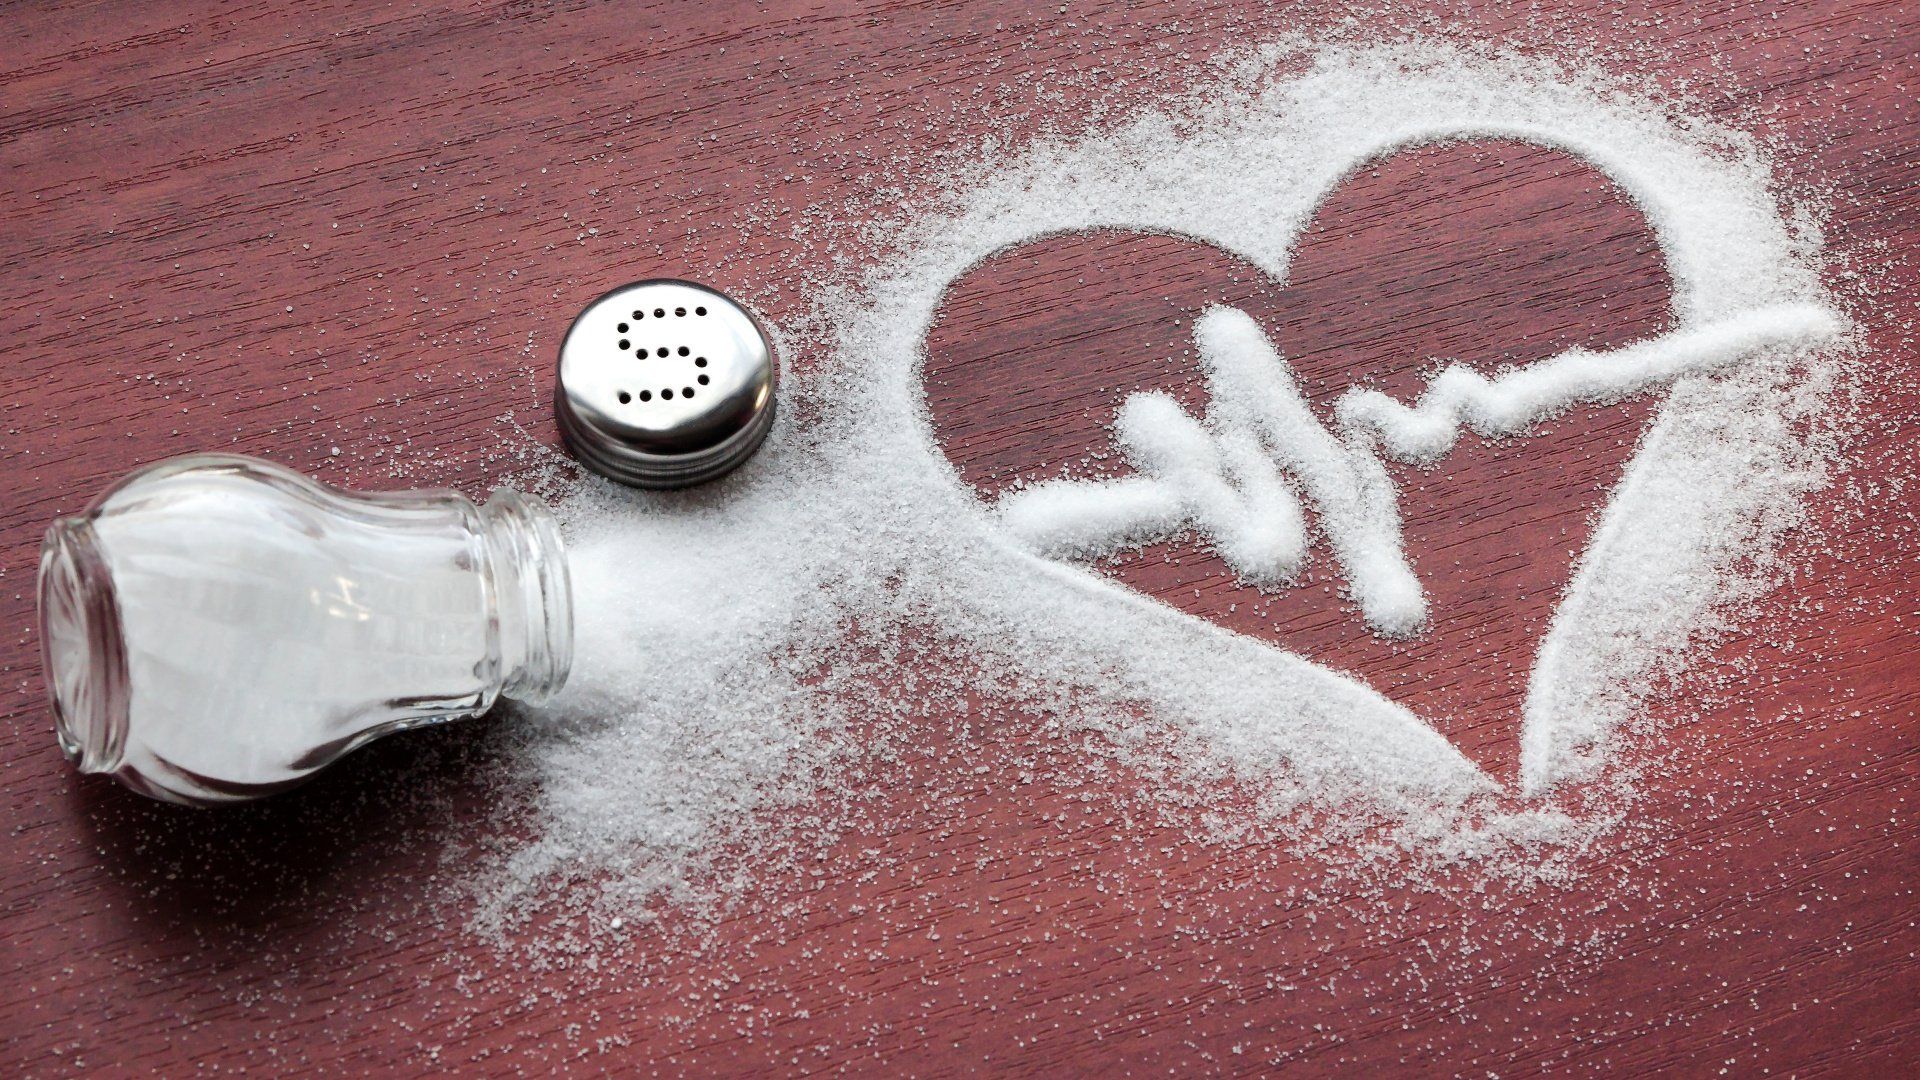 A salt shaker and a heart drawn in salt on a table.